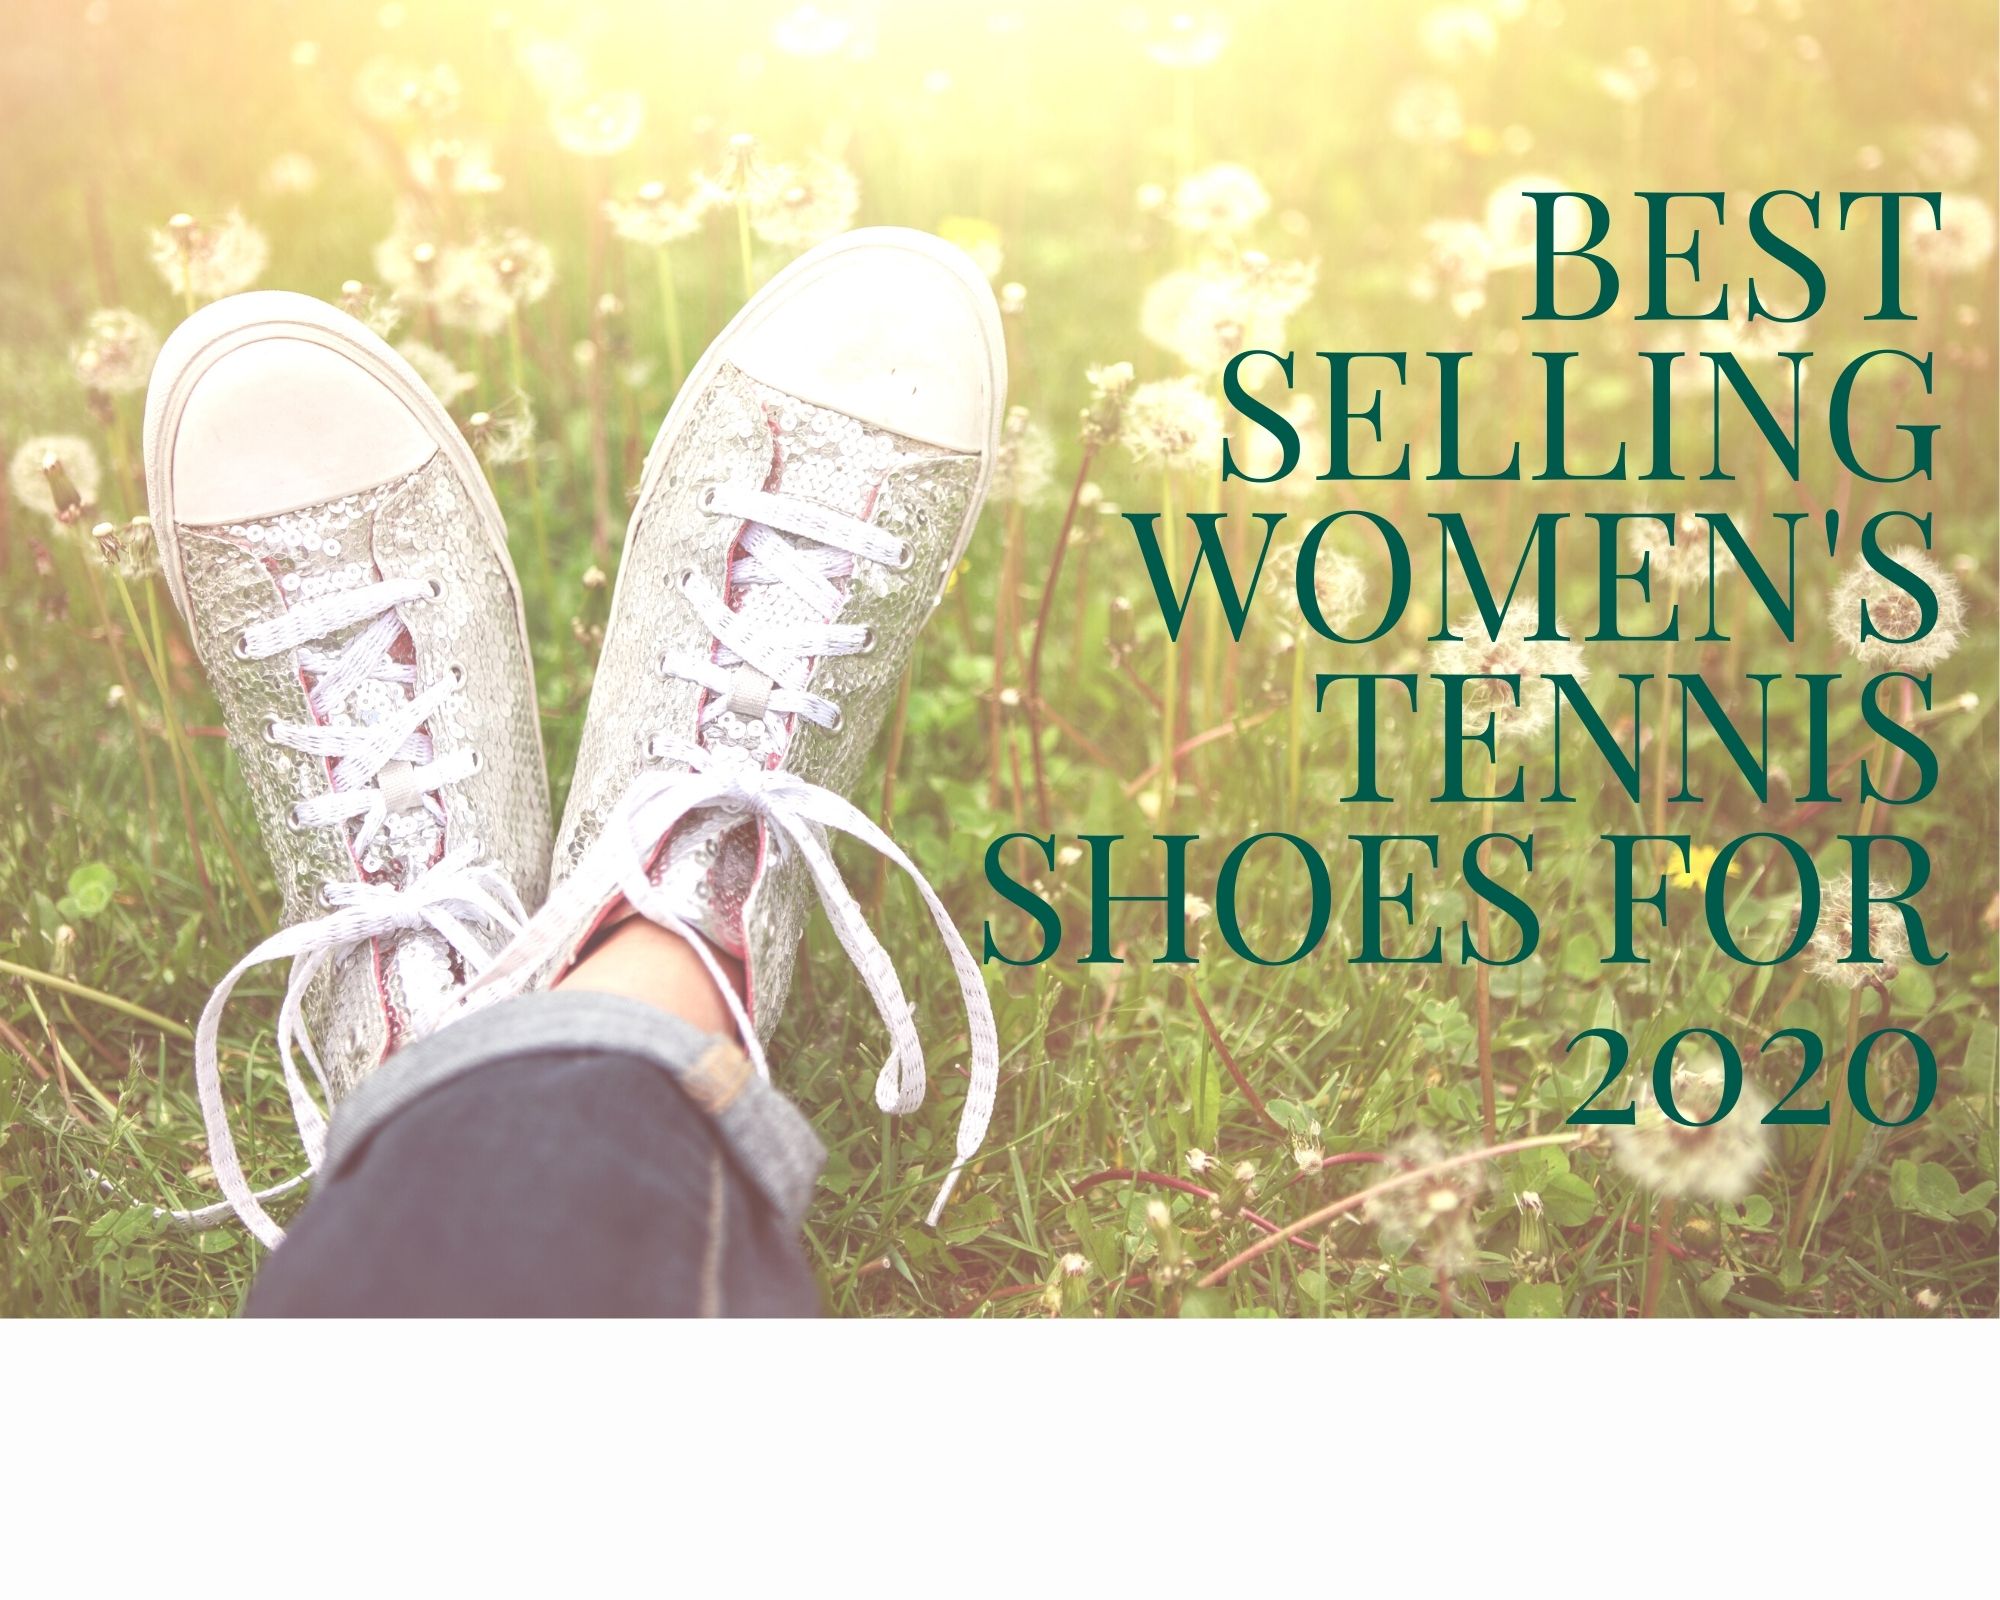 Best Selling Women’s Tennis Shoes for 2020